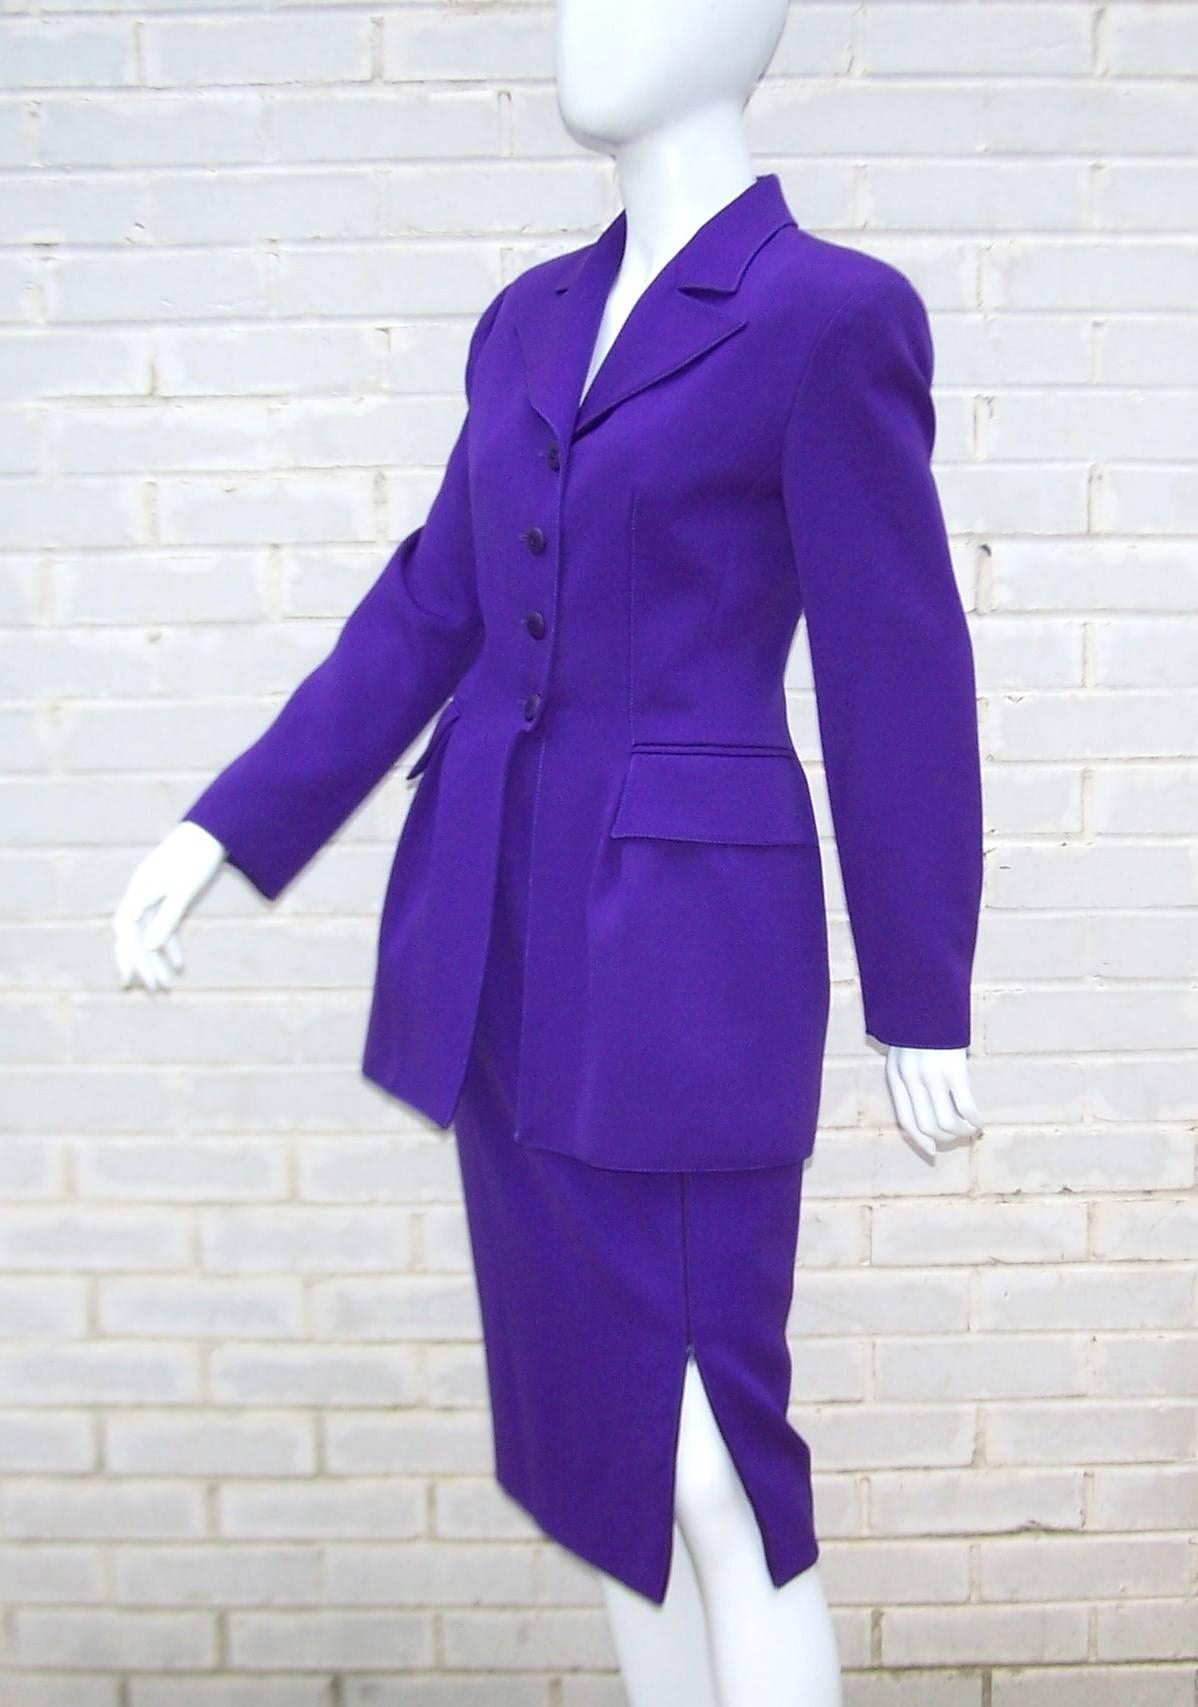 Oh the luxury of a well appointed Valentino design!  Not a detail was overlooked in the making of this beautiful suit.  There is no contents label though the purple fabric appears to be a wool blend with the slightest bit of stretch which comes in